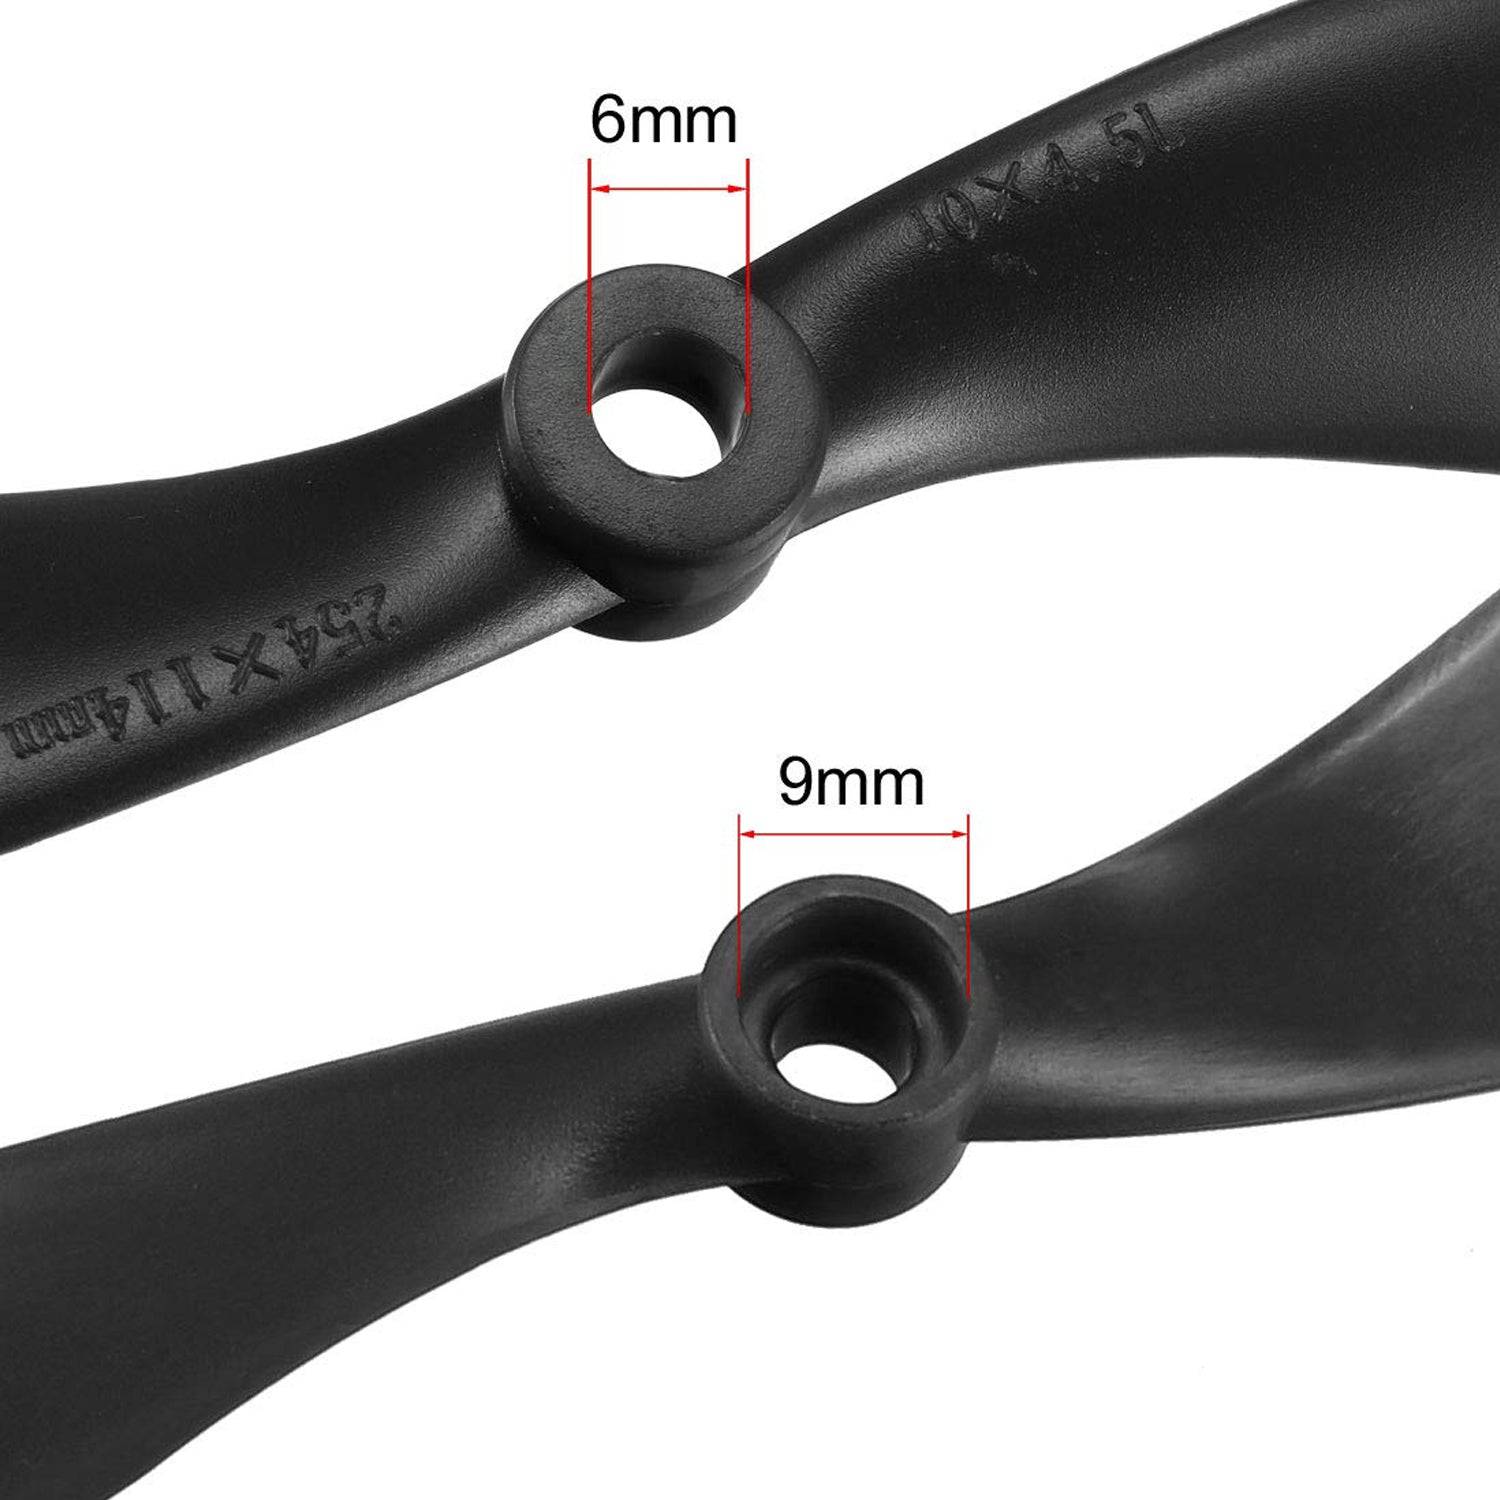 1045 Propeller 10*4.5 inch Propeller CW CCW for Quadcopter